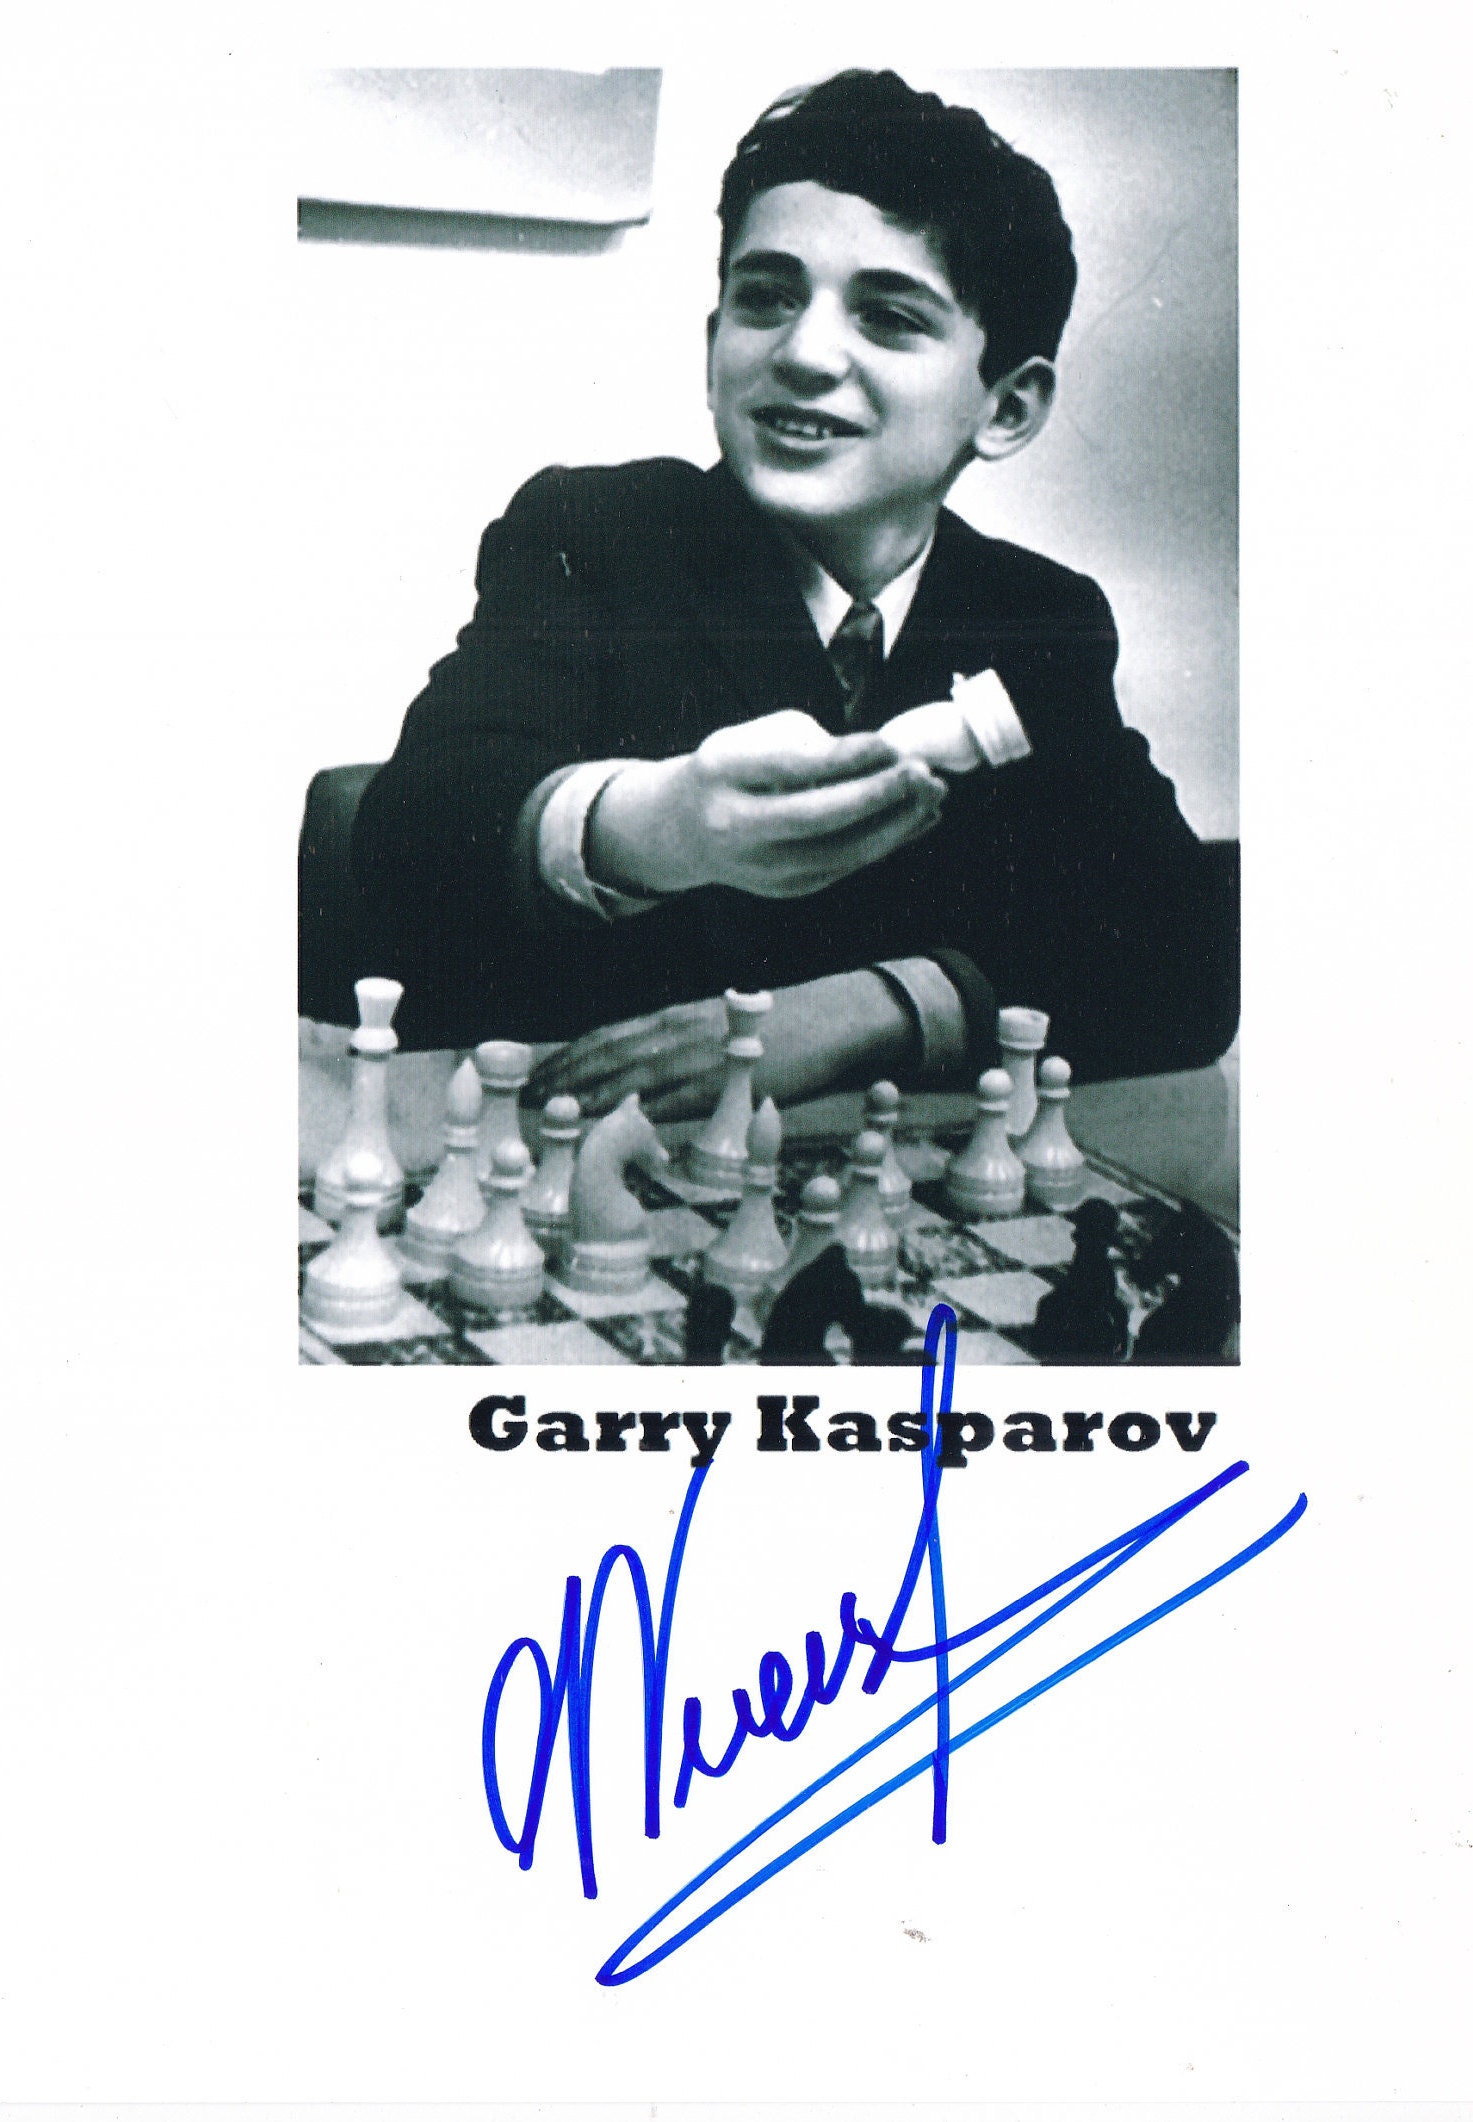 Alekhine Chess Champion 4' Poster, picture, metal print, paint by